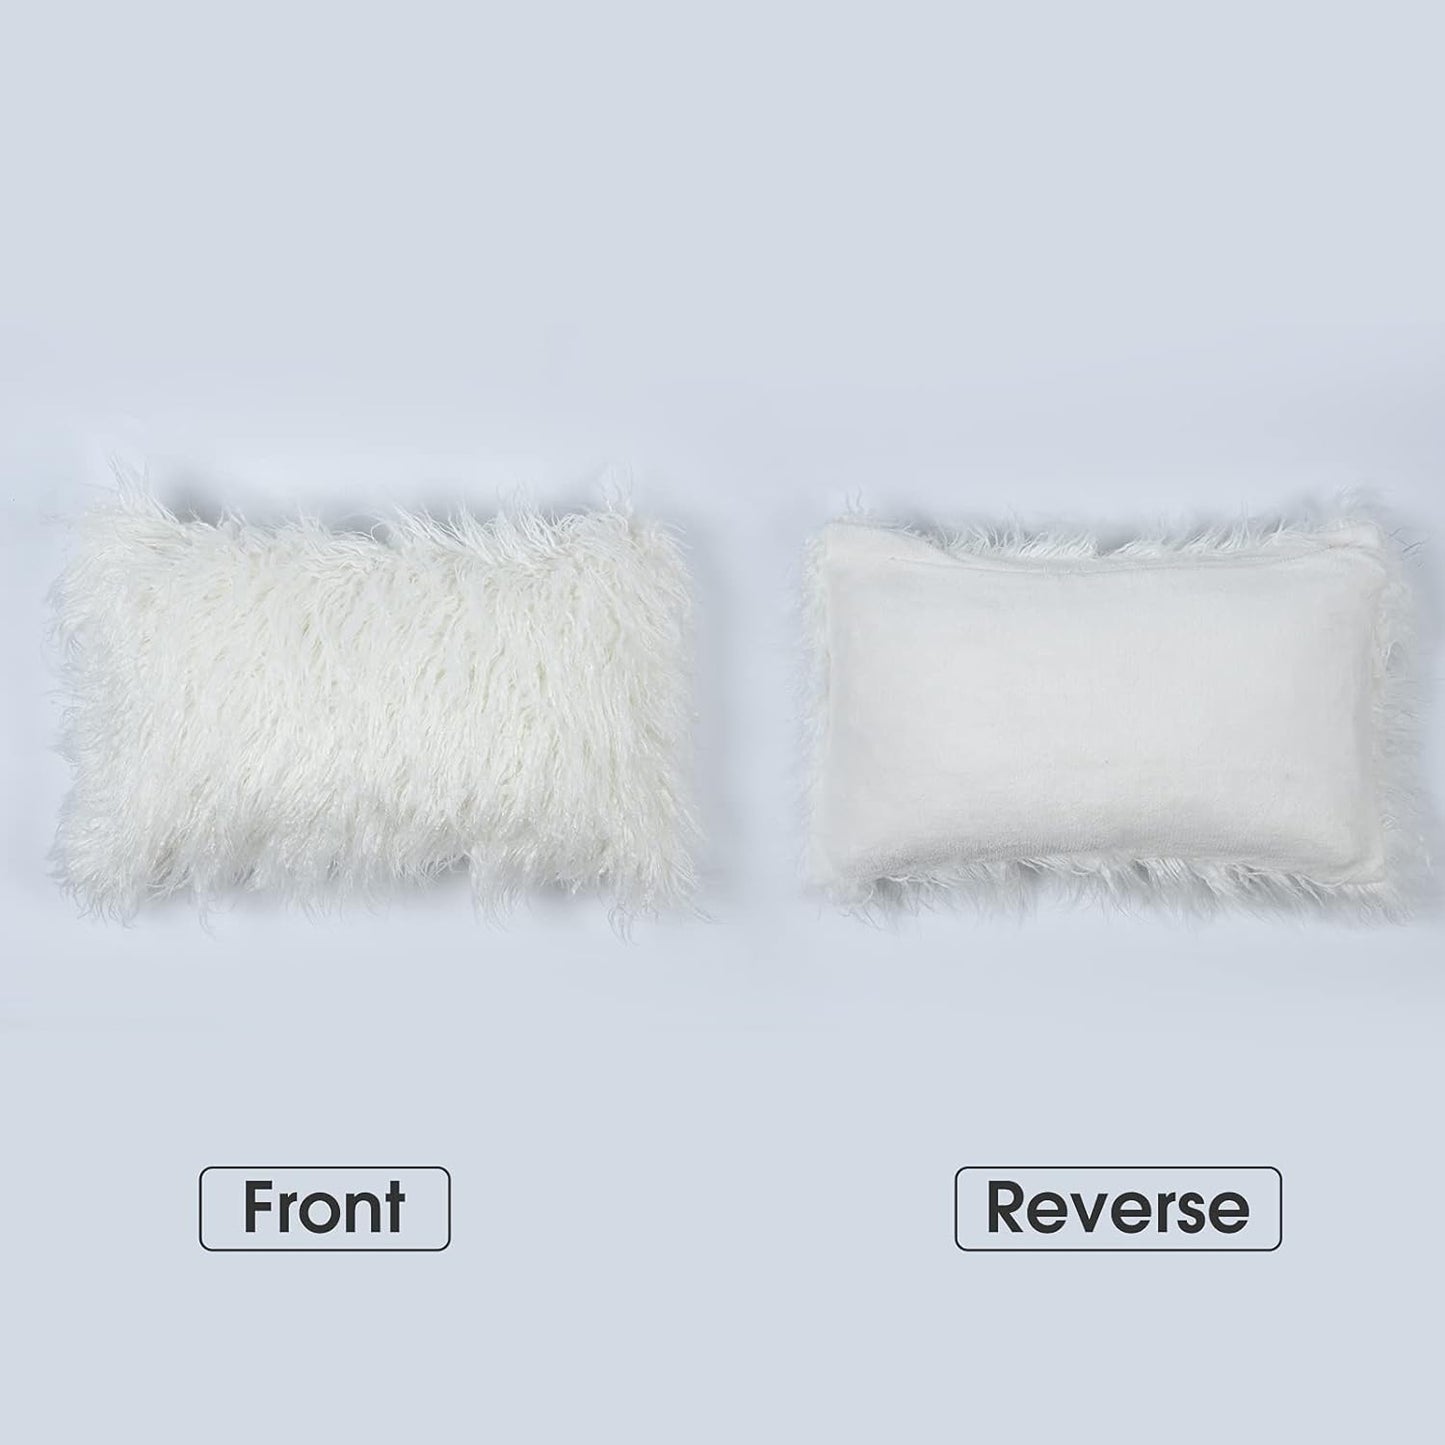 Faux Fur Lumbar Pillowcase, 1-Packed, Decorative Fluffy Throw Pillow Cover 12 X 20 Inches, Luxury Rectangular Cushion Cover for Bed Couch Sofa Living Room, White